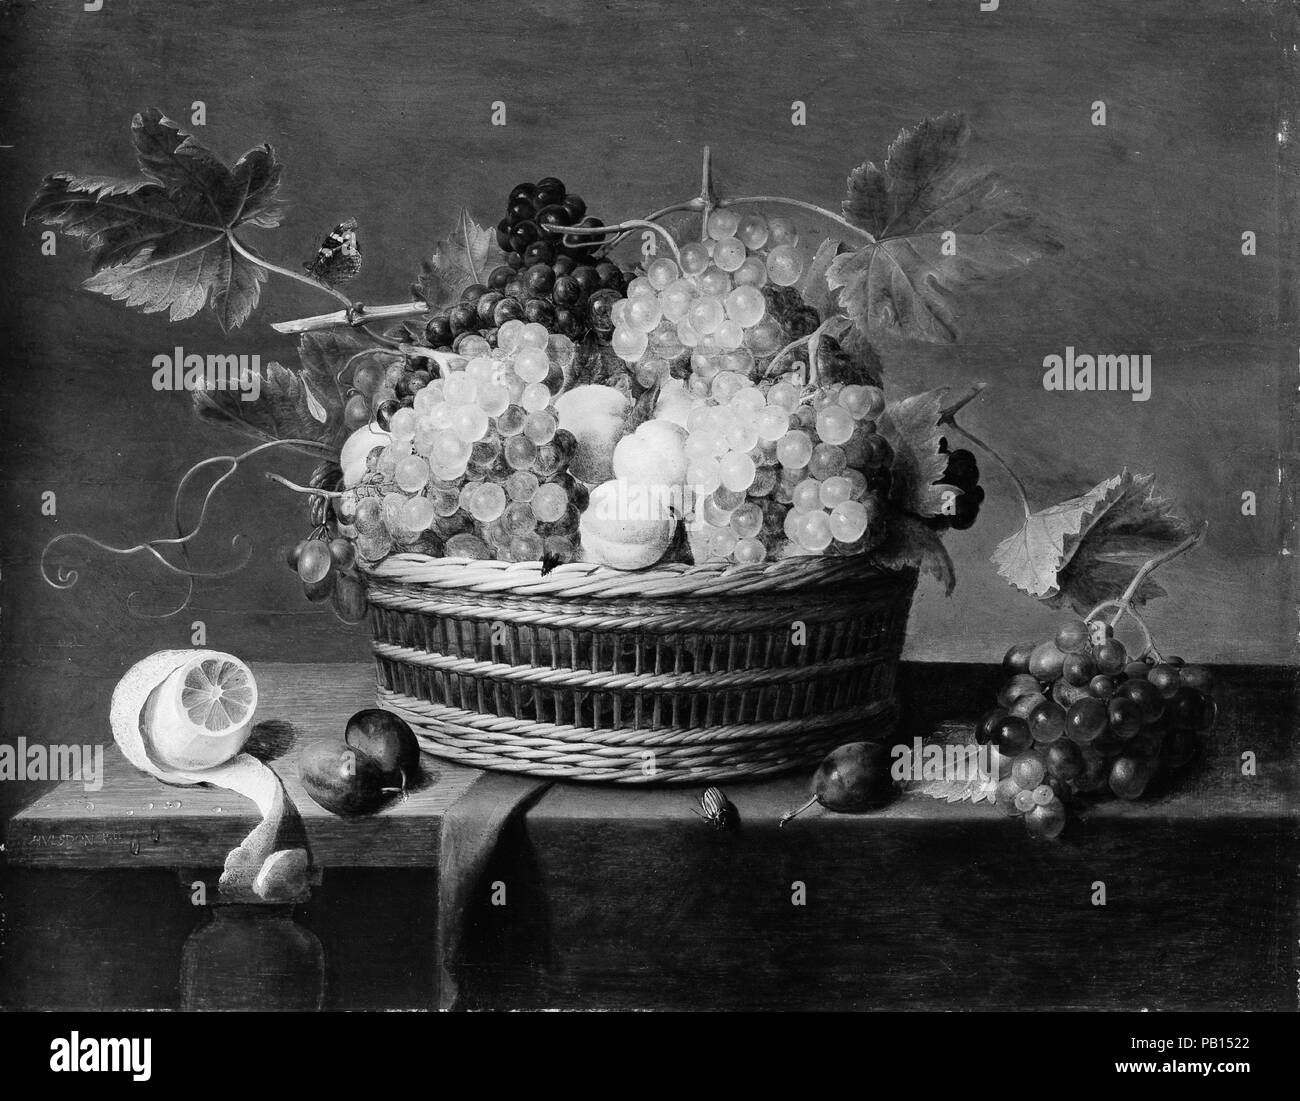 Still Life: A Basket of Grapes and Other Fruit. Artist: Jacob van Hulsdonck (Flemish, 1582-1647). Dimensions: 19 5/8 x 25 1/2 in. (49.8 x 64.8 cm). Date: probably ca. 1635-45.  Hulsdonck was born in Antwerp but spent his early years in the southern Dutch port of Middelburg, where the flower painter Ambrosius Bosschaert (1573-1621) was his model. In this late work Hulsdonck employs a standard Antwerp composition, familiar from pictures by Jan Breughel I and II and by Frans Snyders (from whom the rhythmic tendrils come). Museum: Metropolitan Museum of Art, New York, USA. Stock Photo